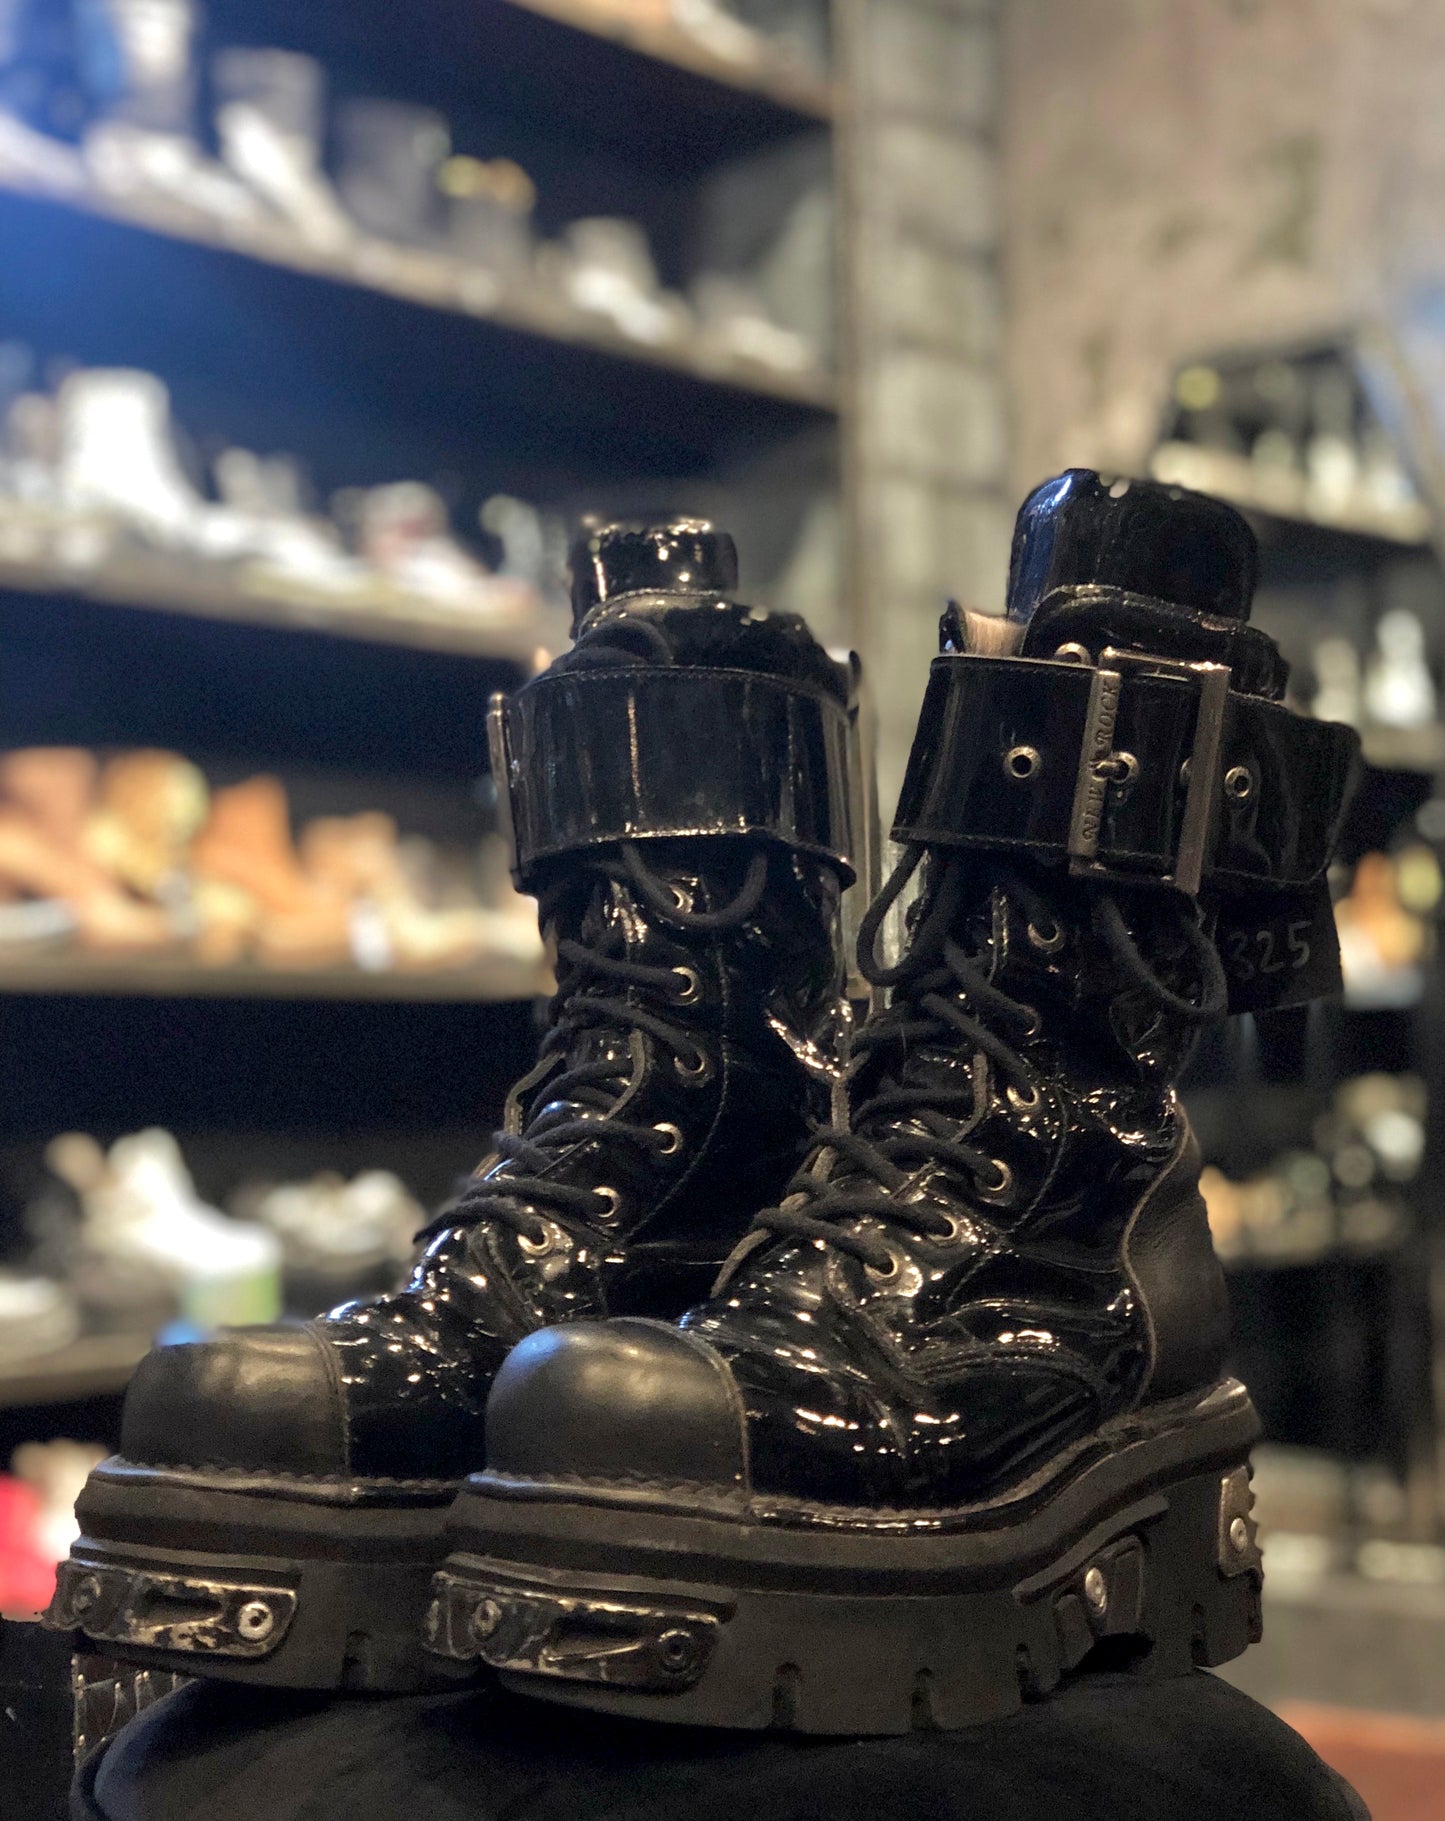 New Rock Black Patent Leather Reactor Buckle Boots